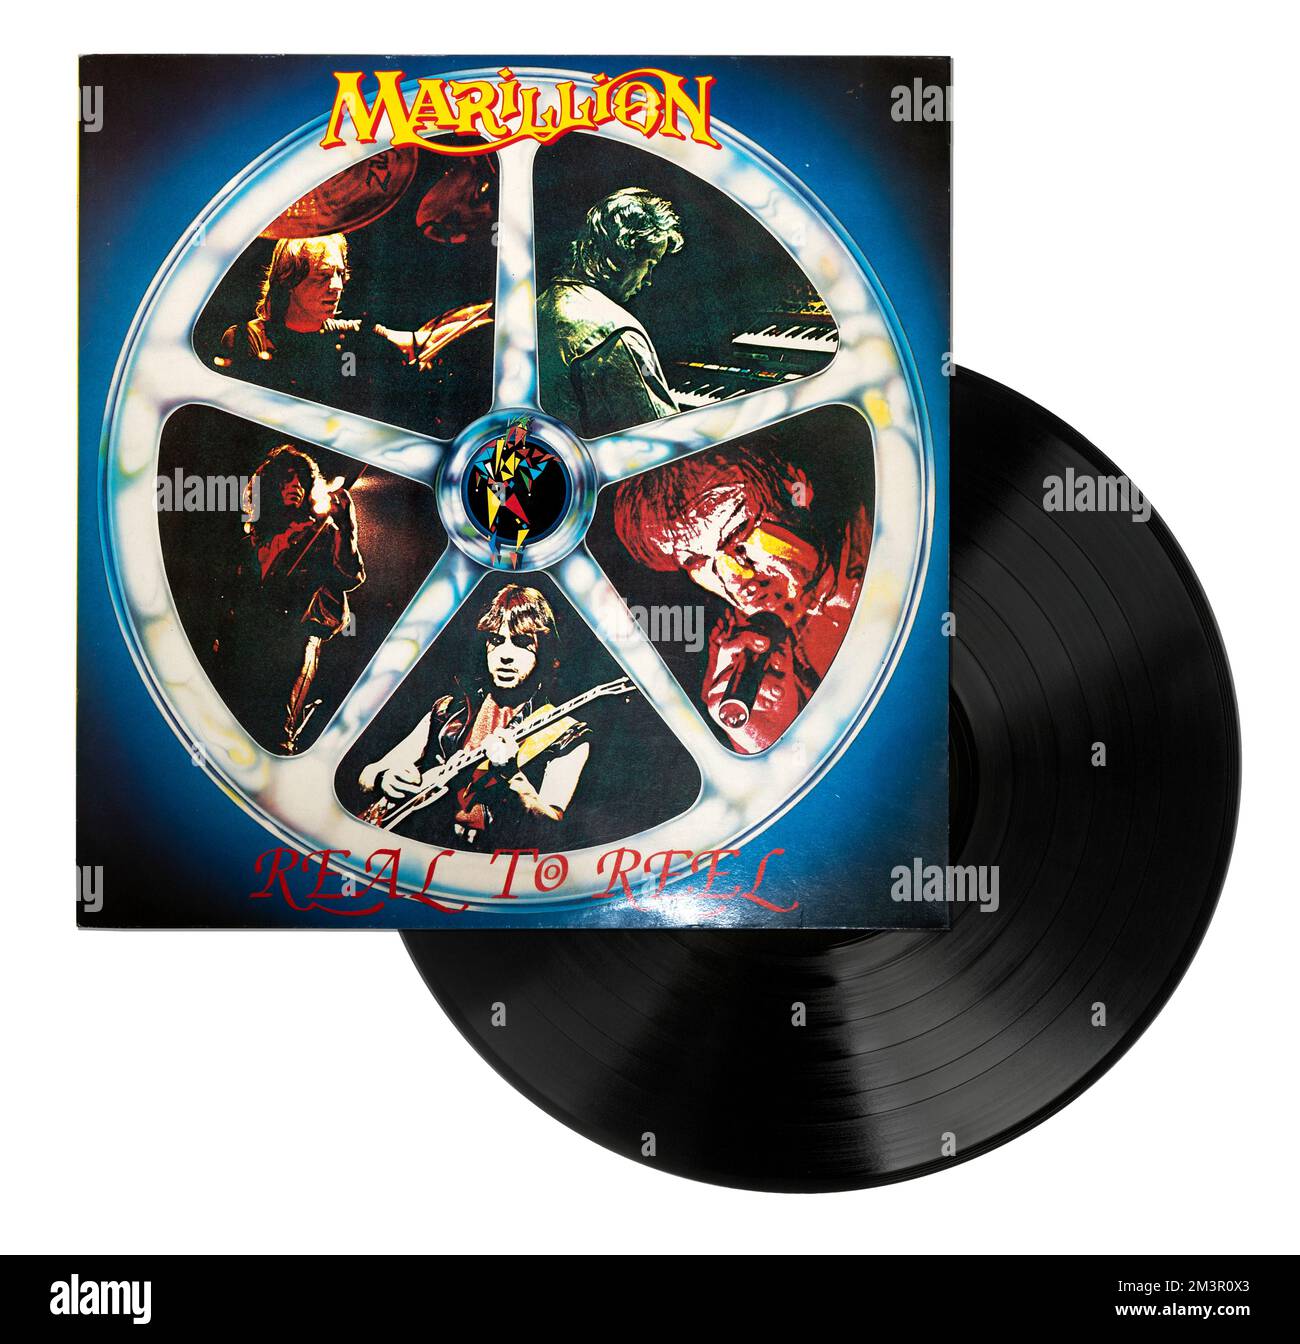 Real to Reel is the first live album by the British neo-progressive rock band Marillion, released in November 1984. Stock Photo